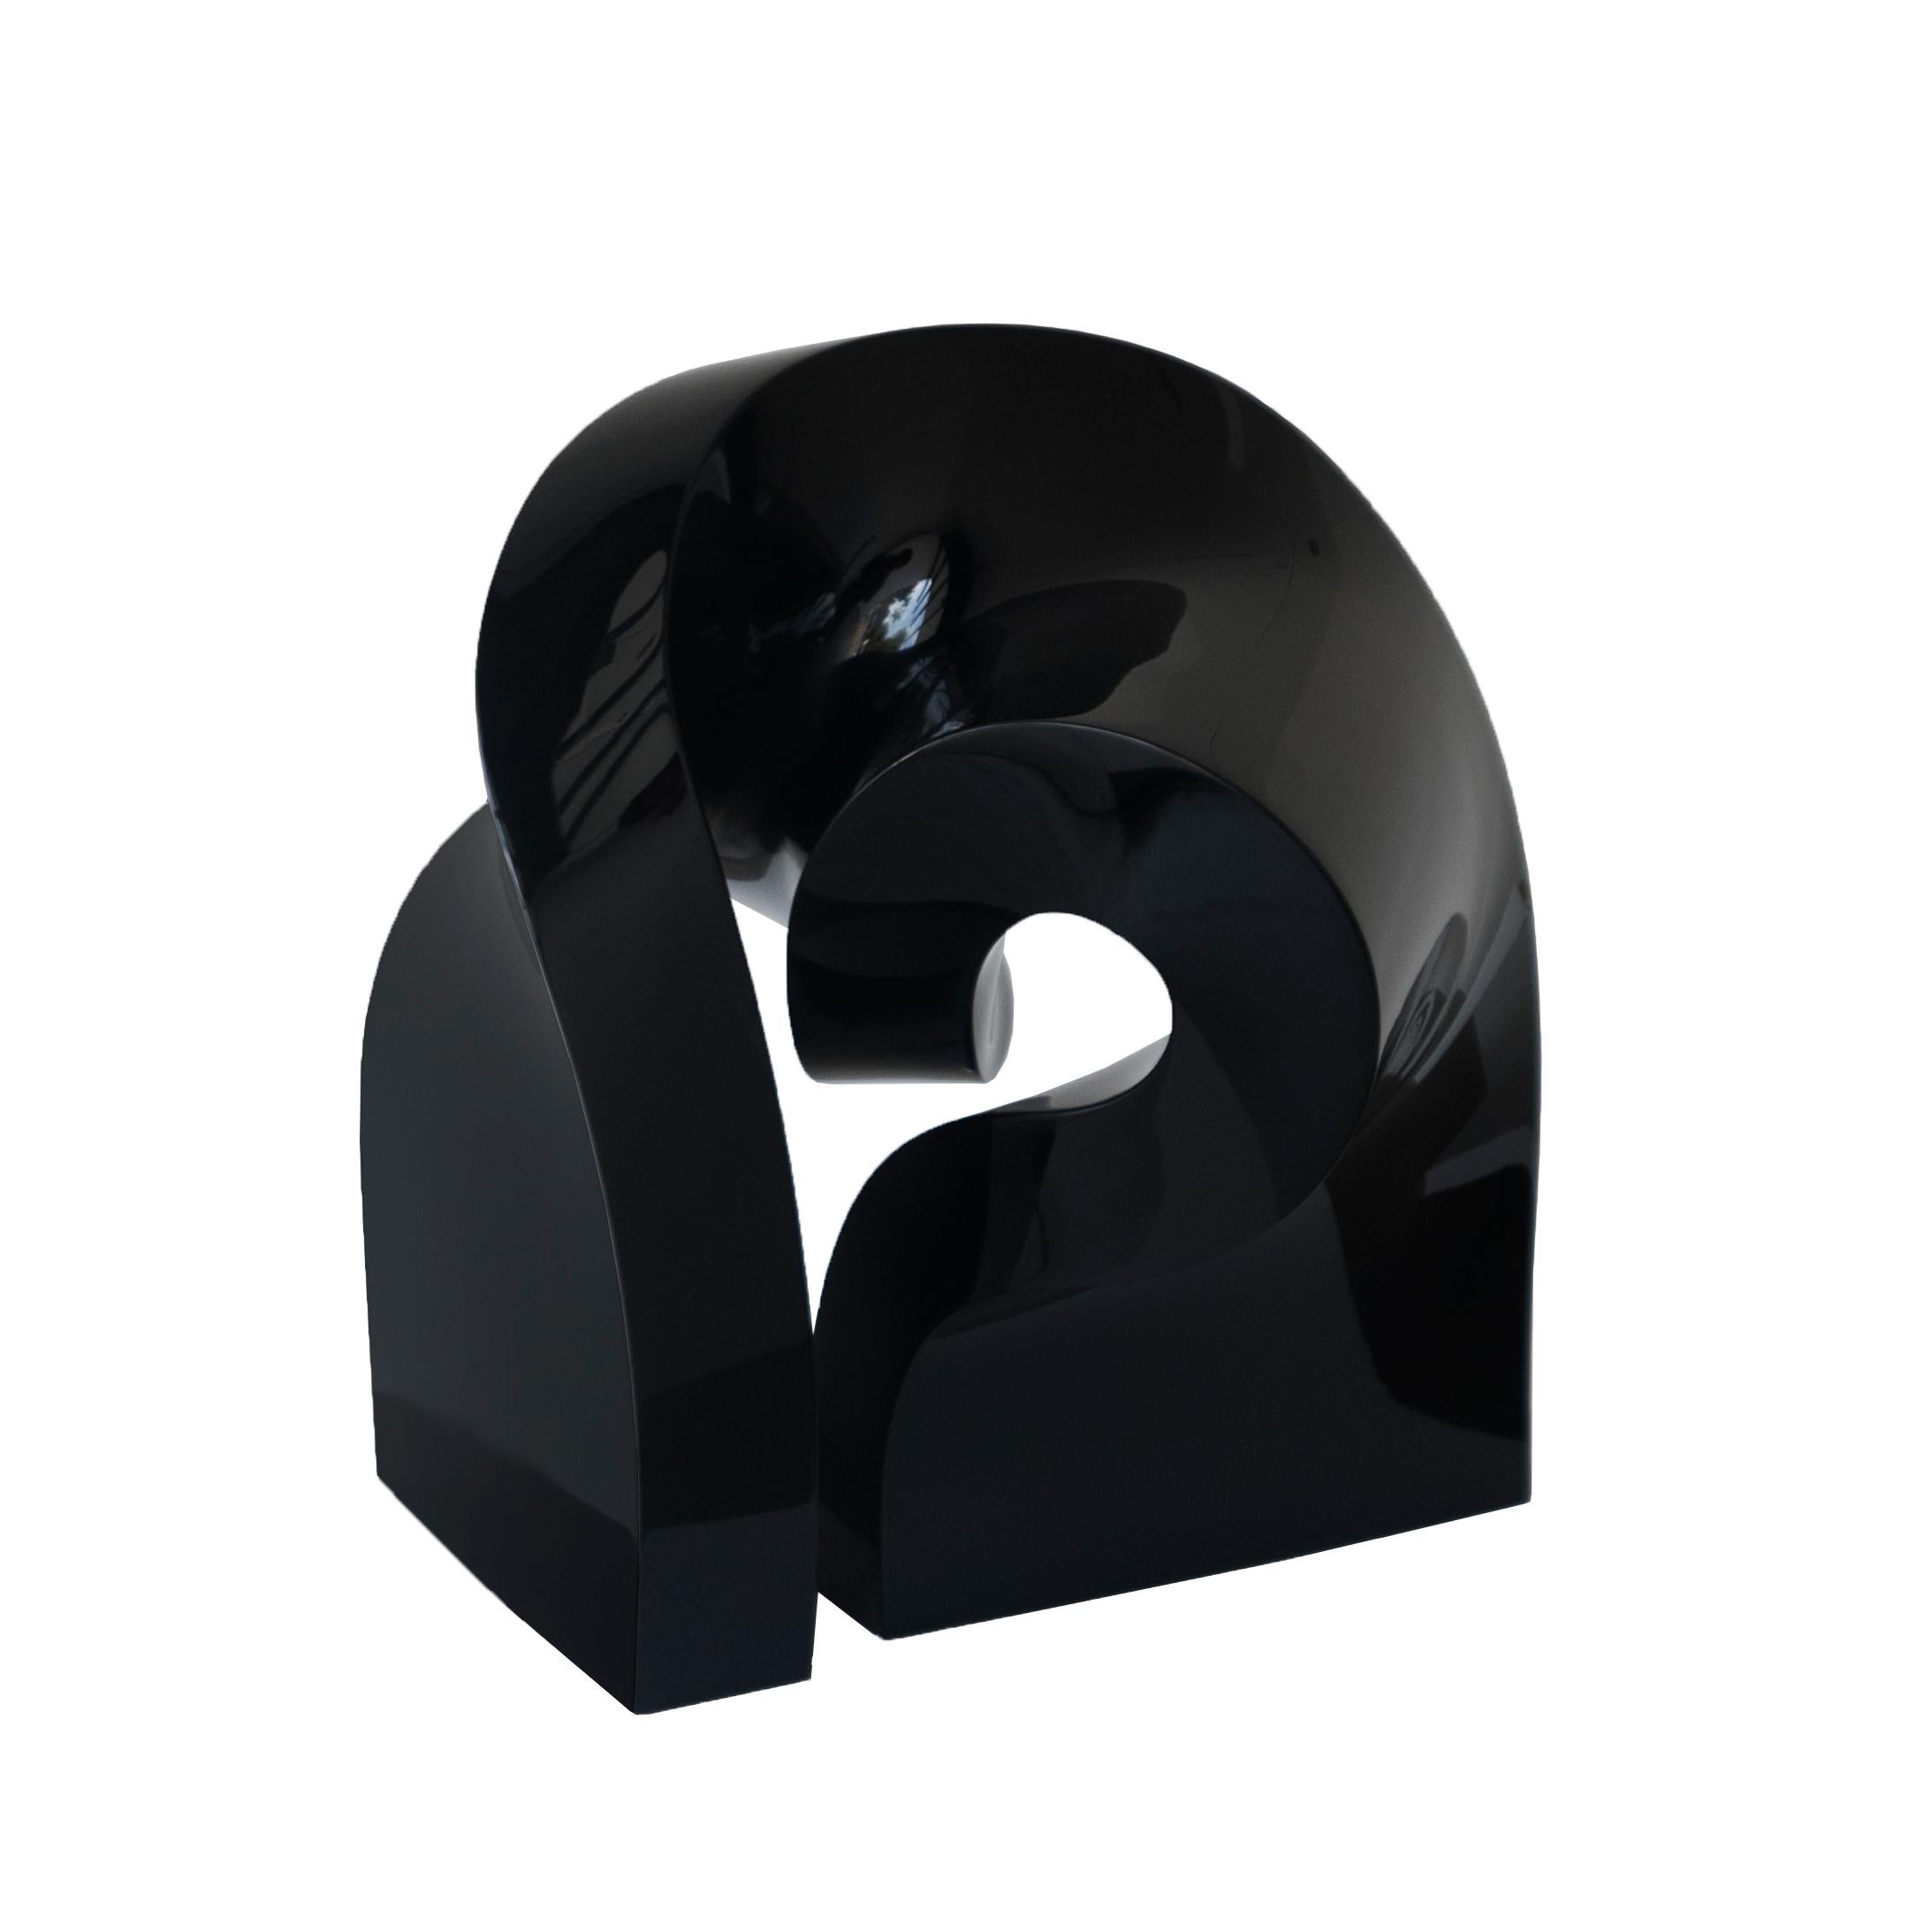 Stephanie Bachiero Abstract Sculpture - Helix (Black), Edition 4/8